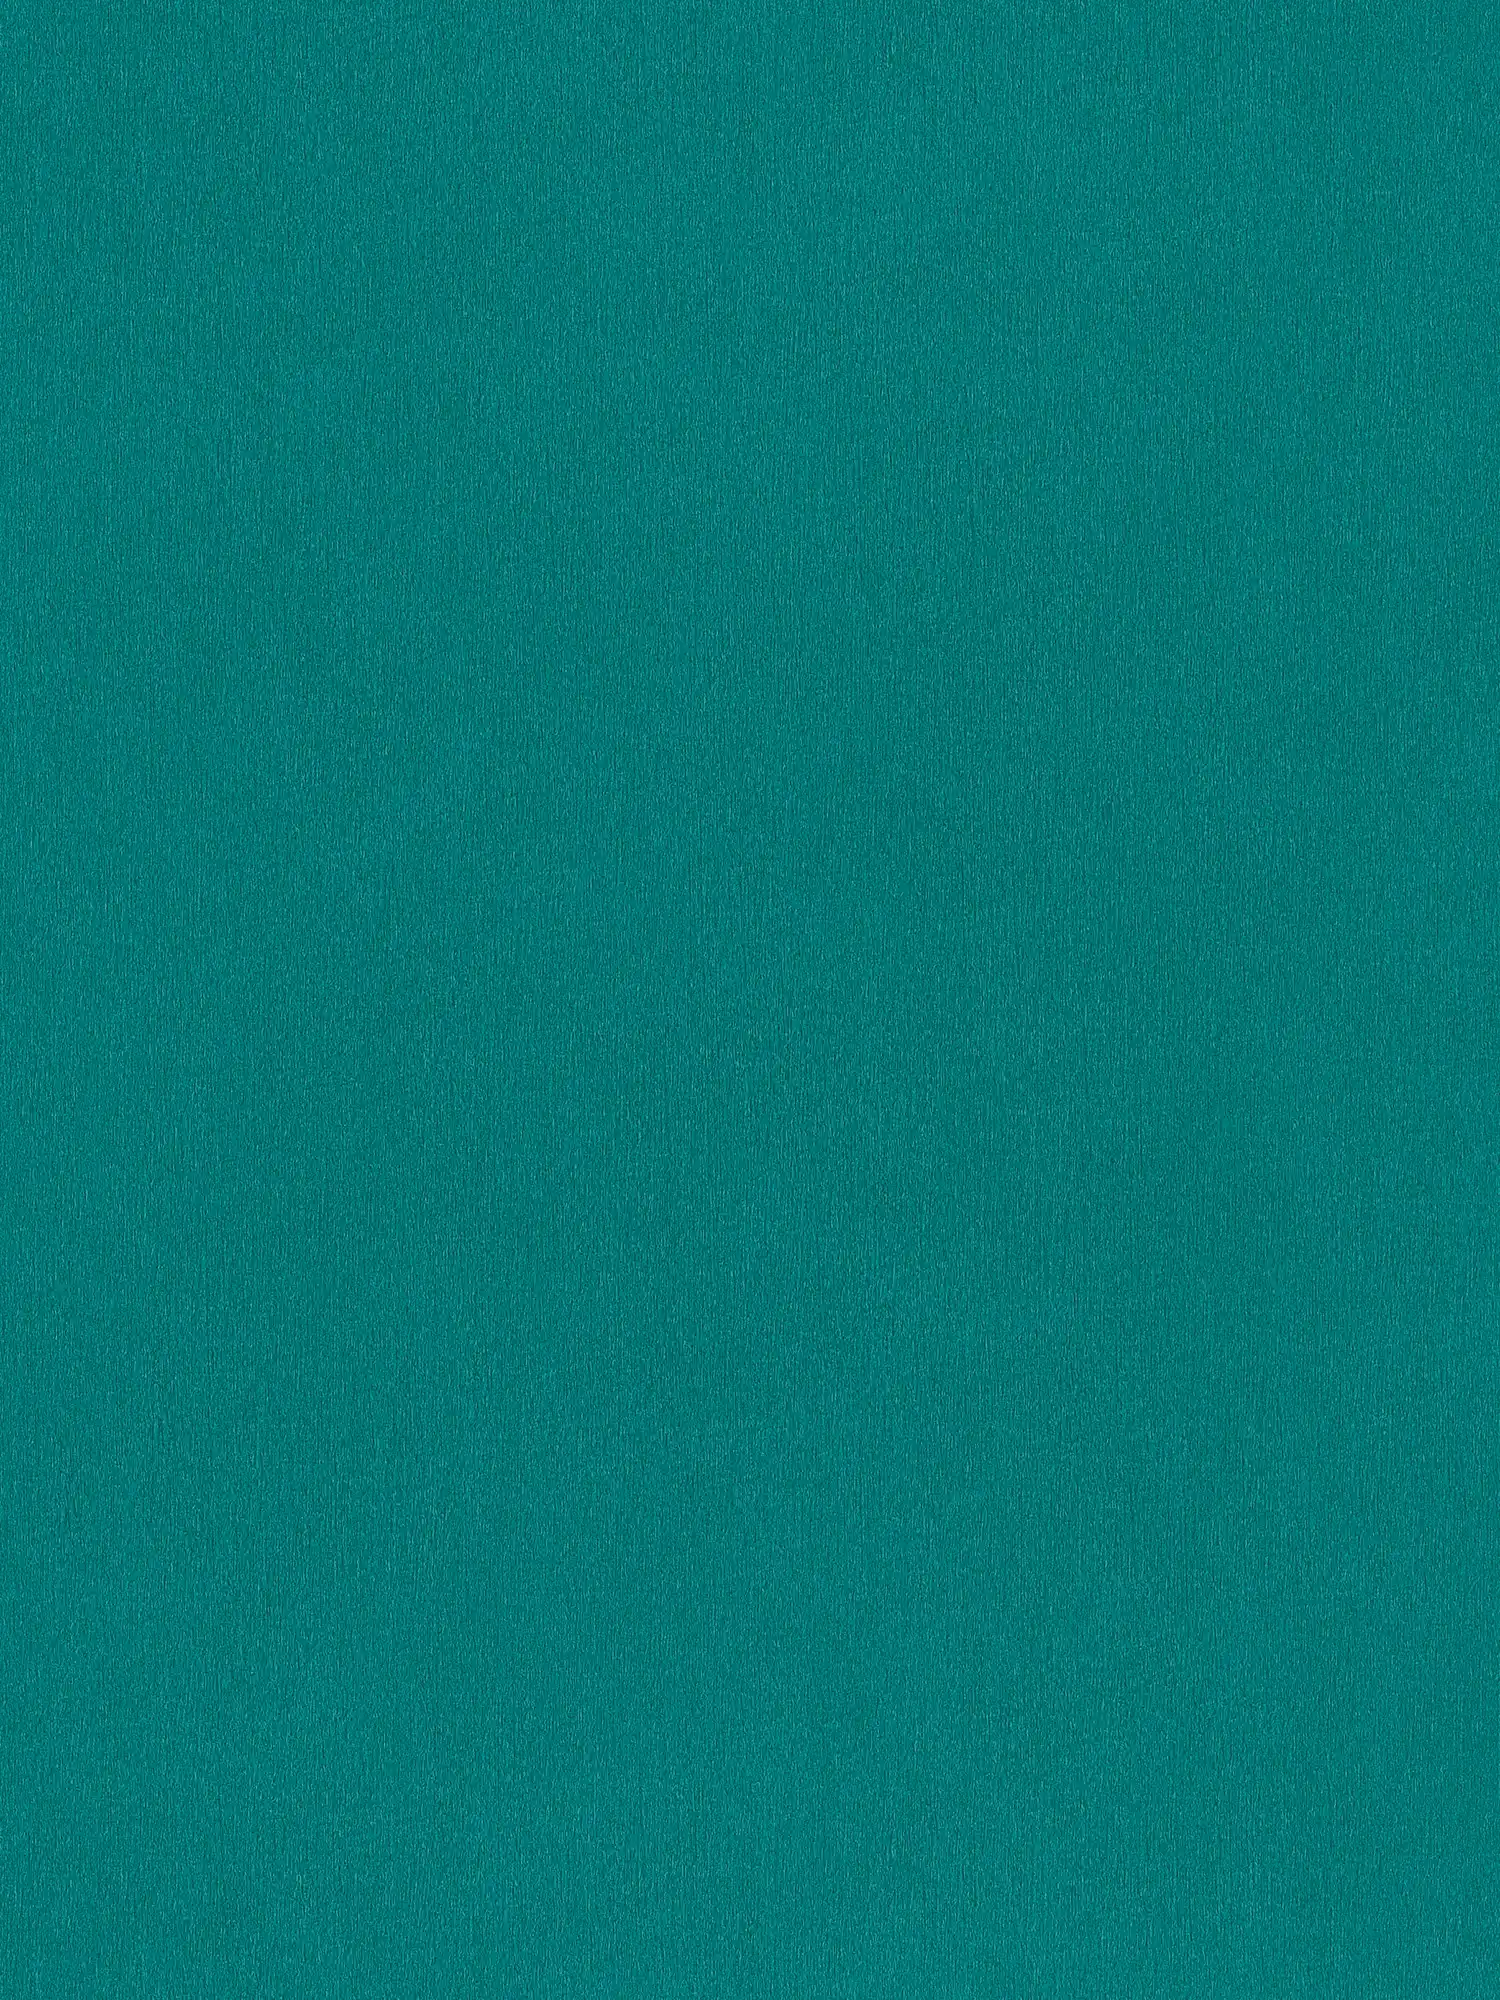 Turquoise wallpaper petrol green with colour texture
